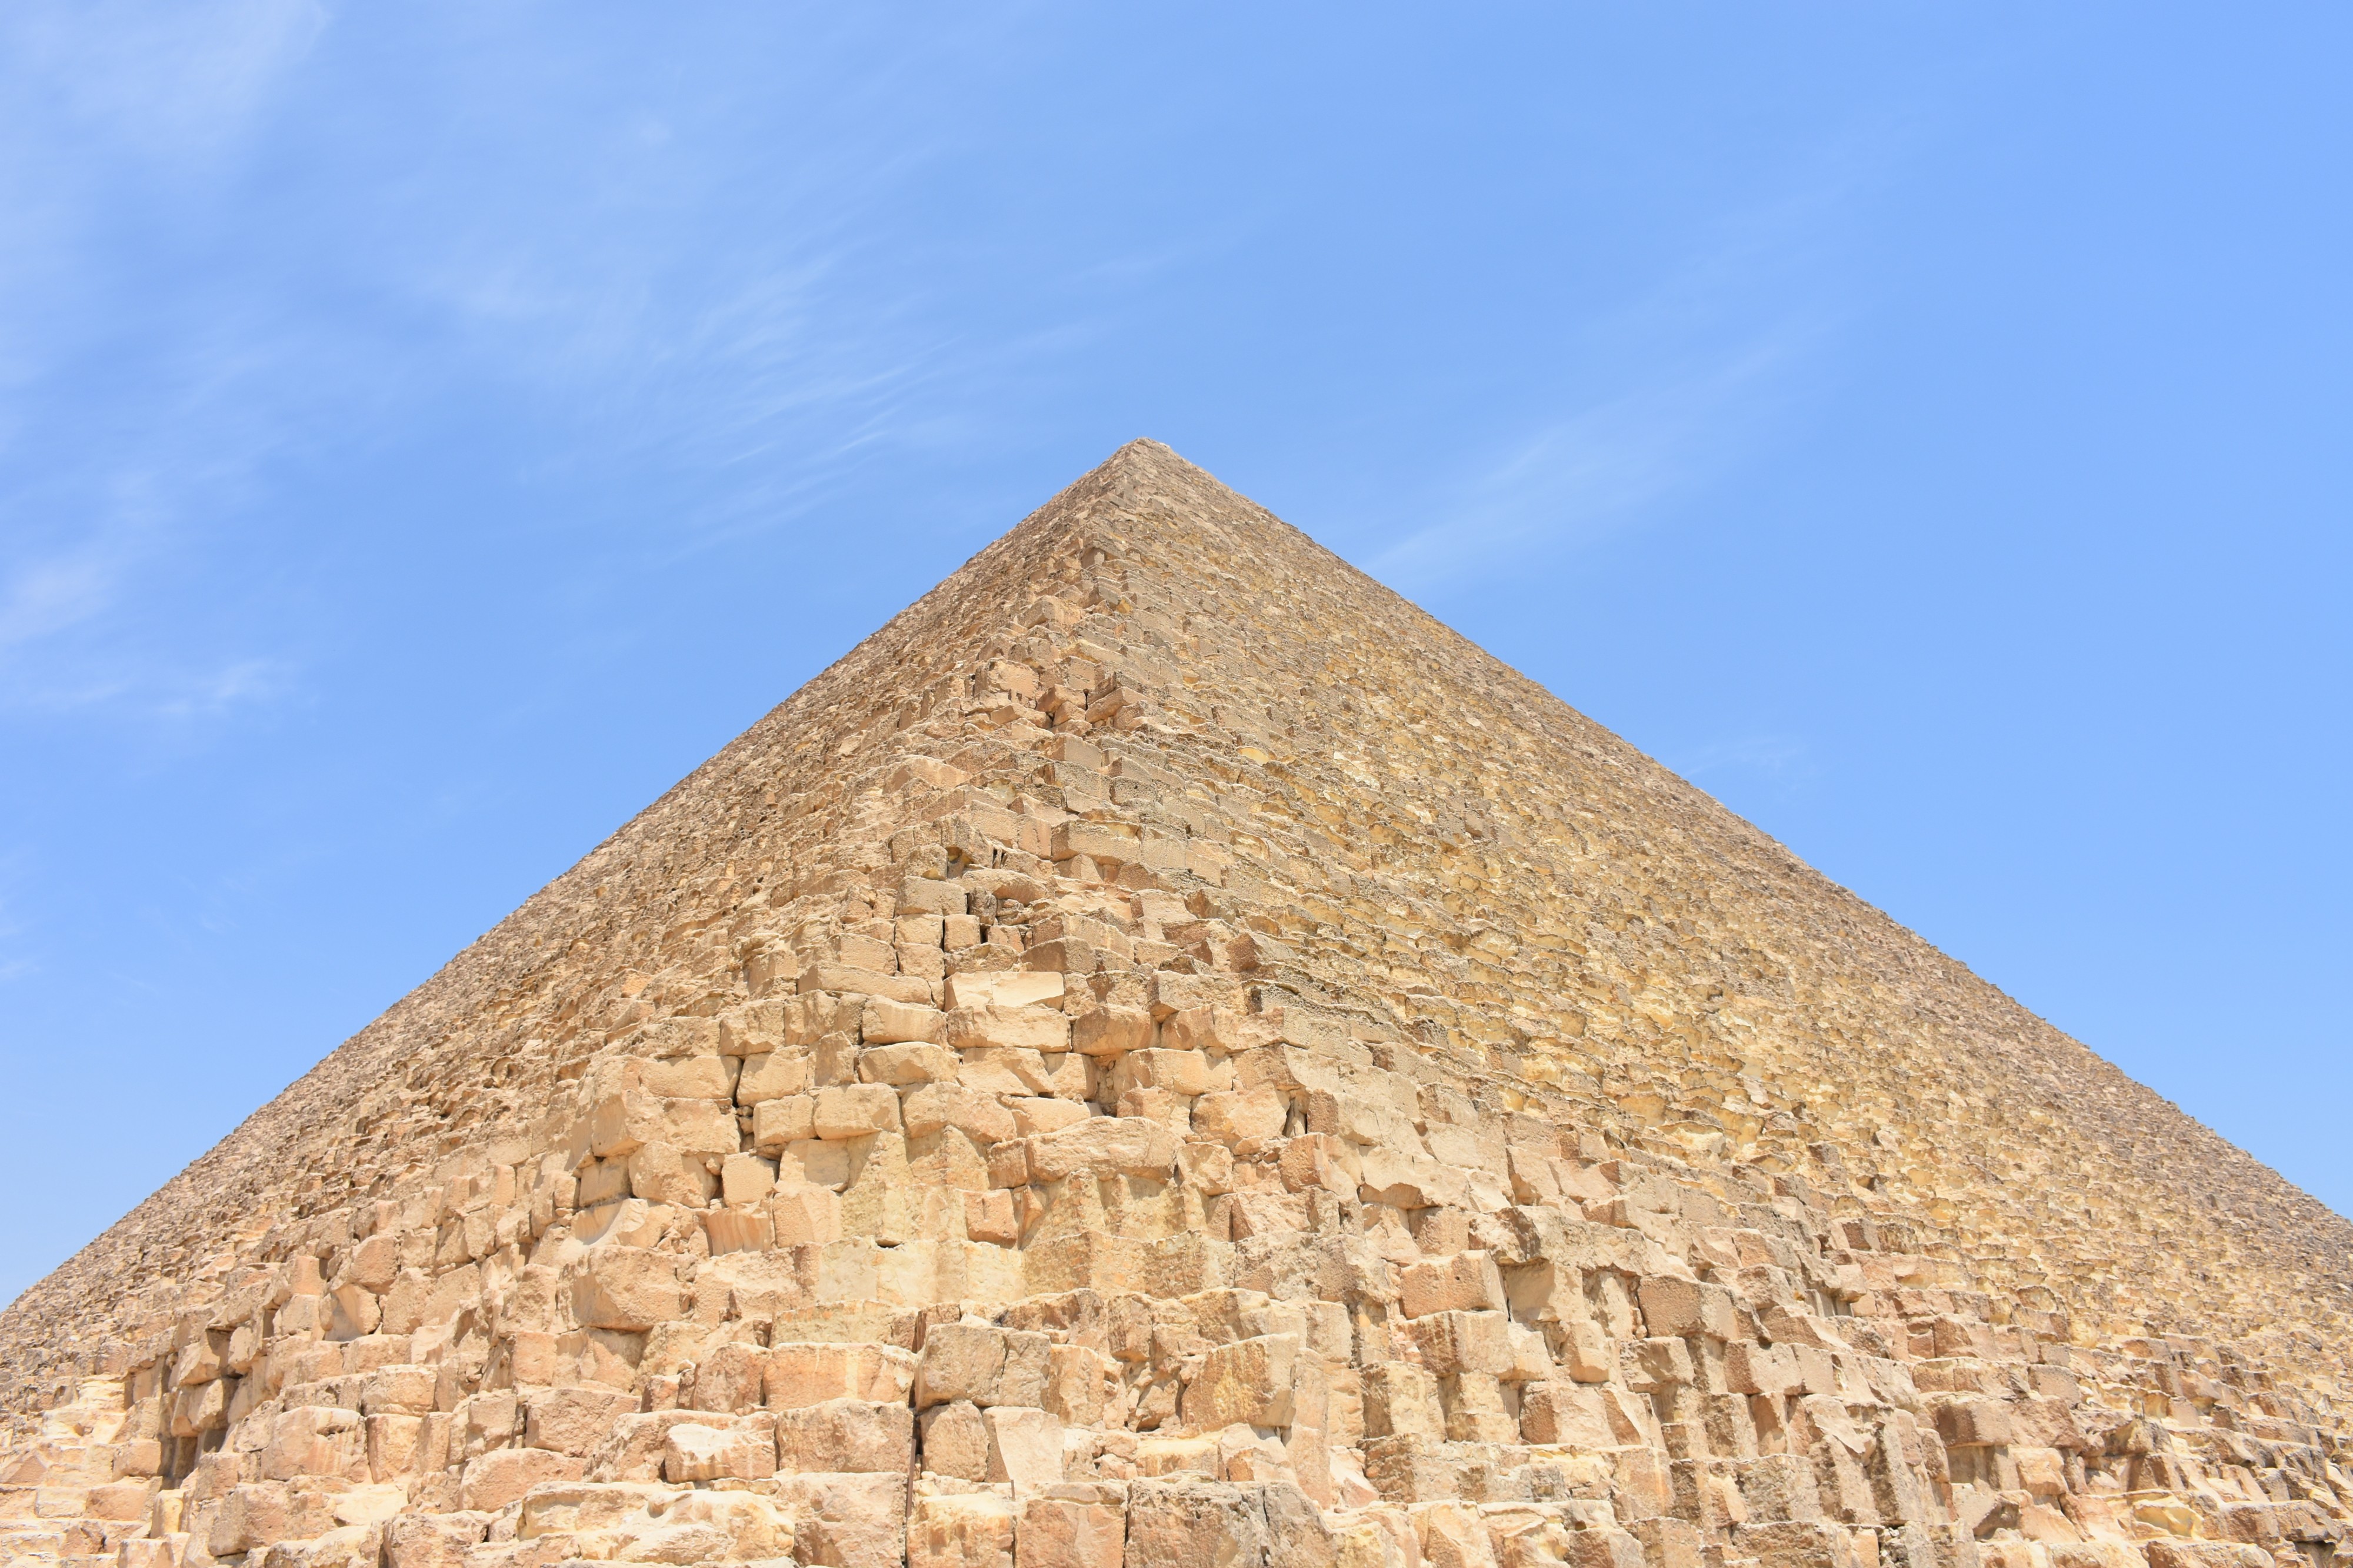 The Great Pyramid of Giza from southeast corner